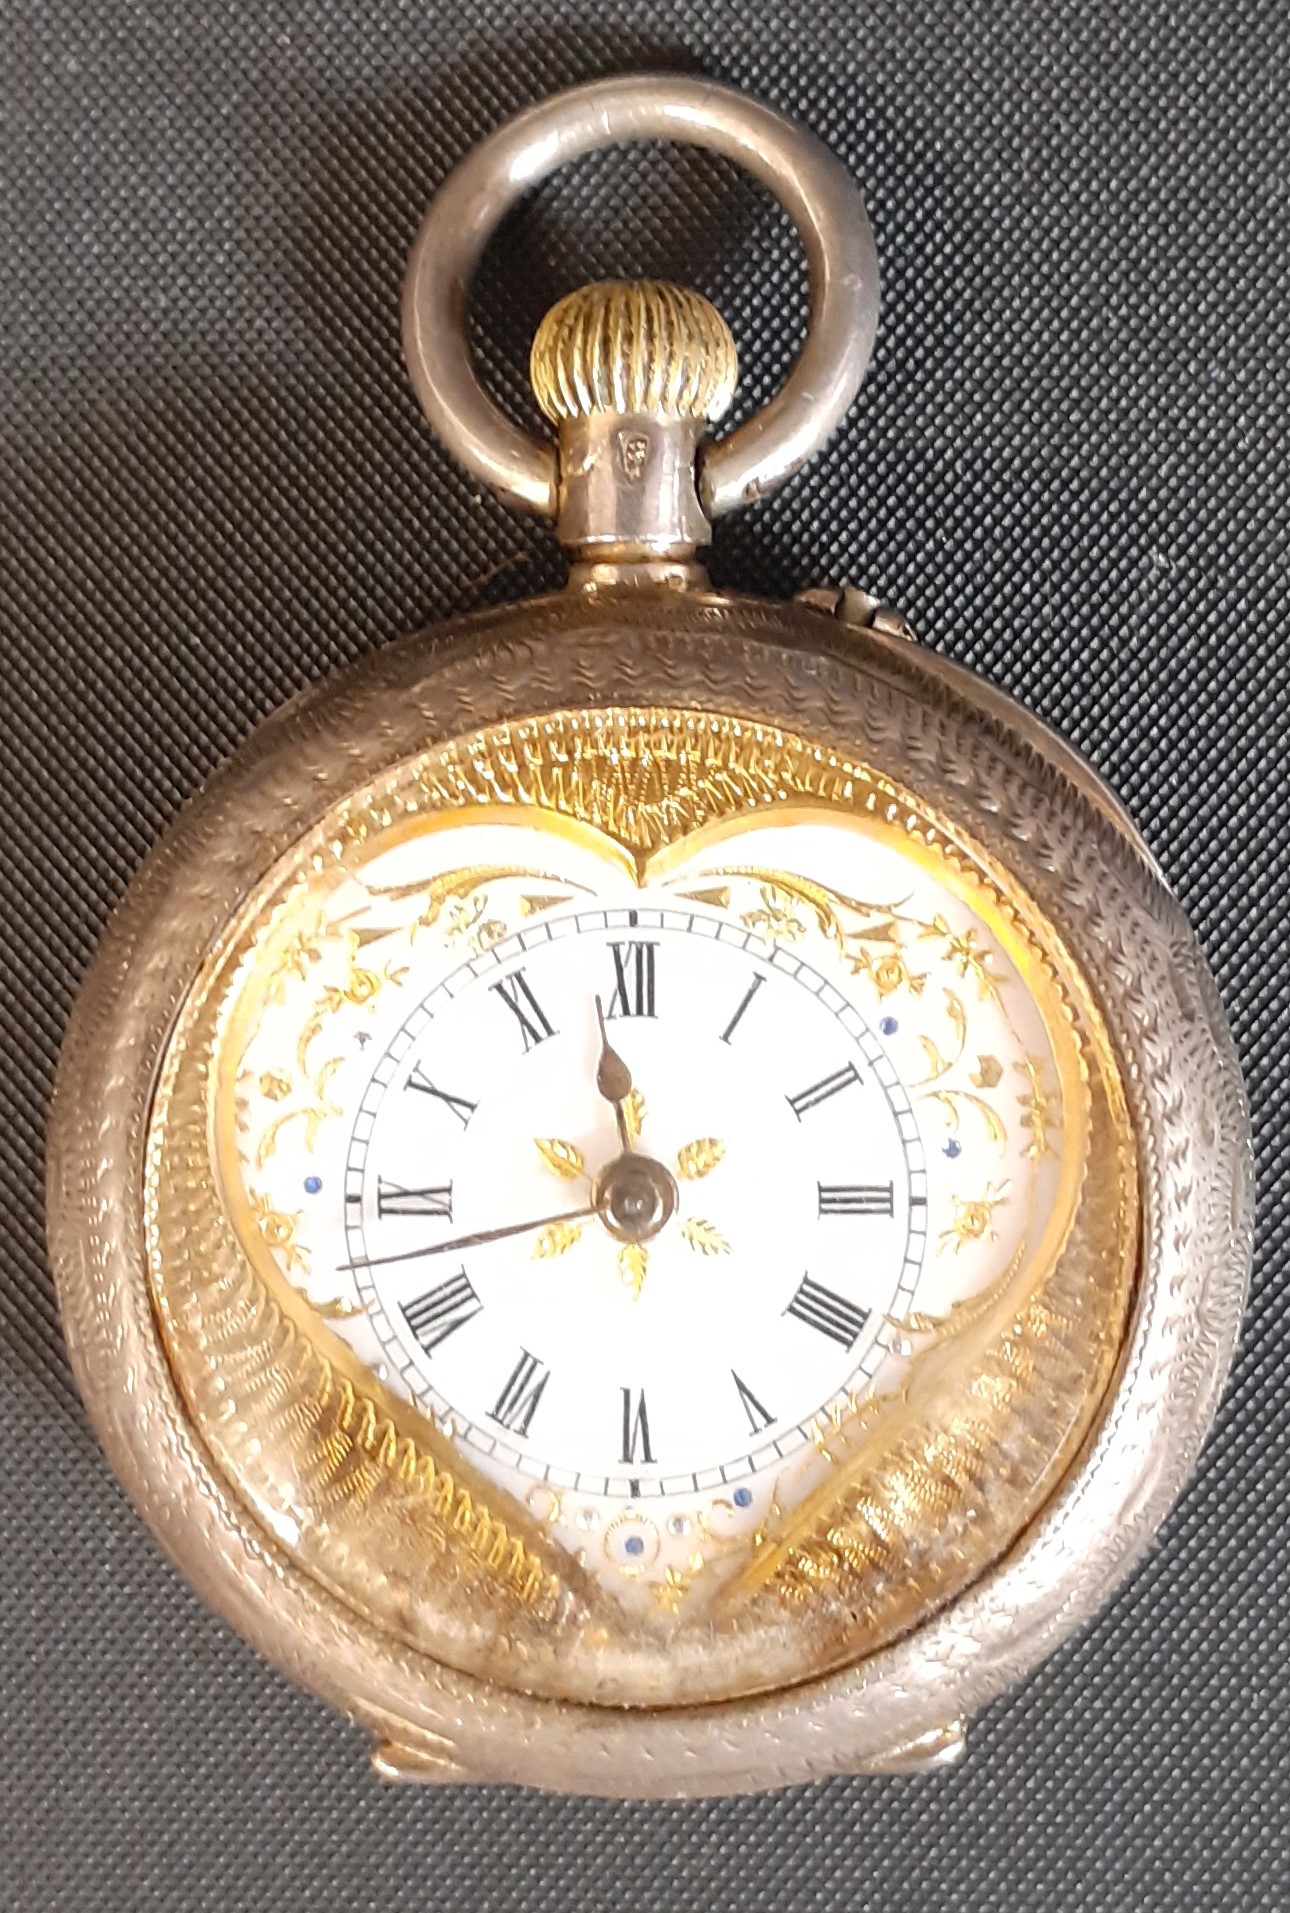 Continental silver gilt top wind fob watch marked 935 with engine turned case, heart shaped